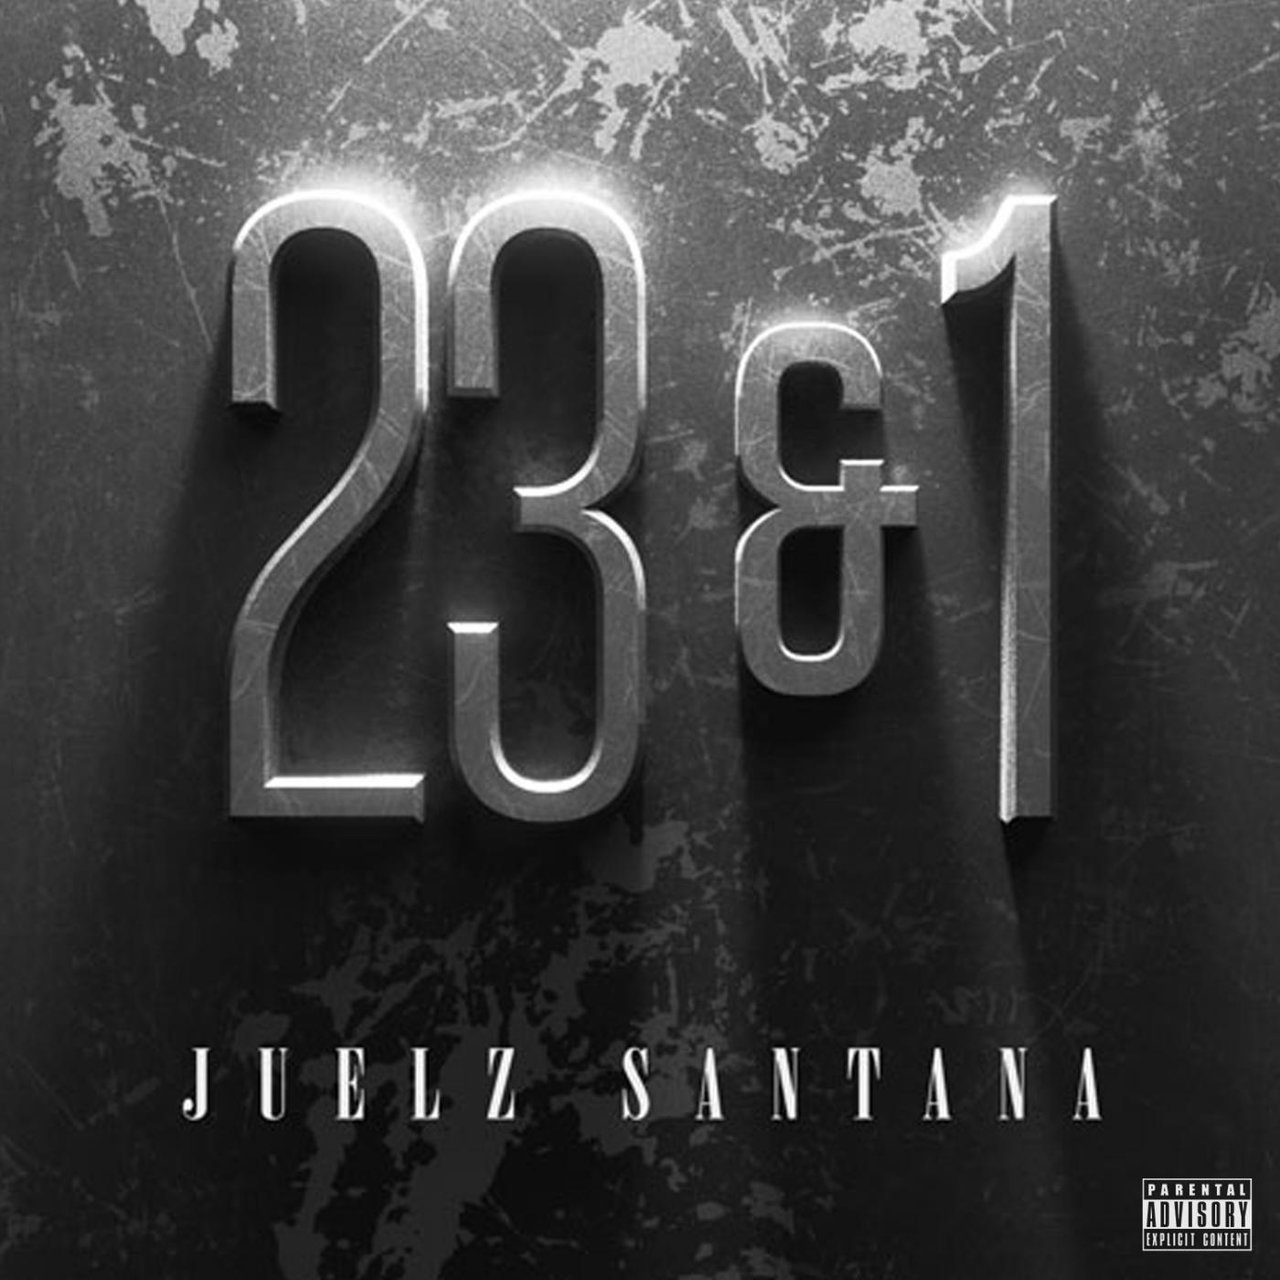 Juelz Santana - 23 and 1 (Cover)